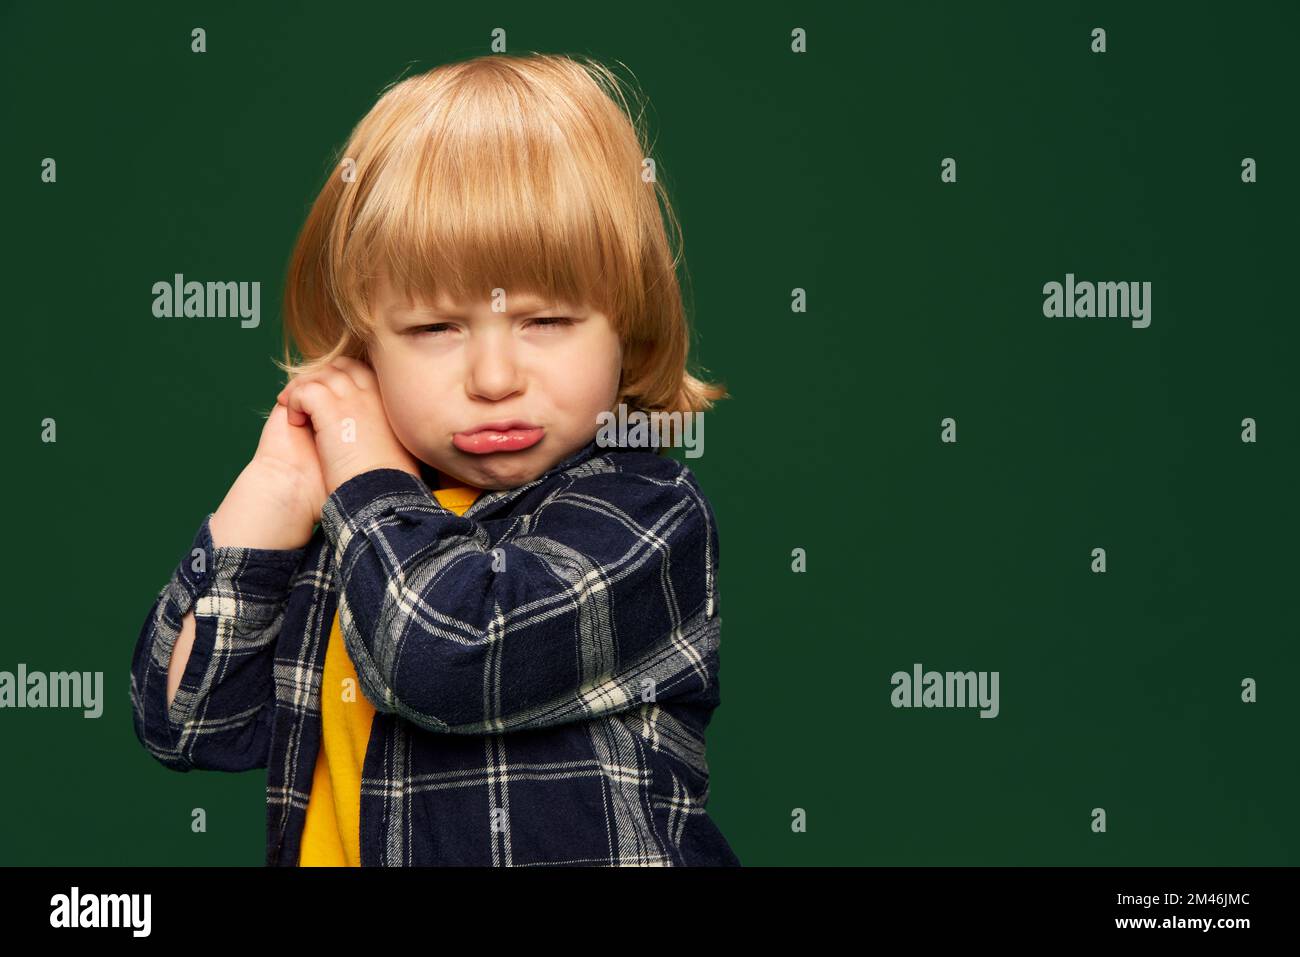 Portrait of cute little boy, child posing over green studio background. Feeling sleepy and tired. Acting up. Concept of childhood, emotions Stock Photo